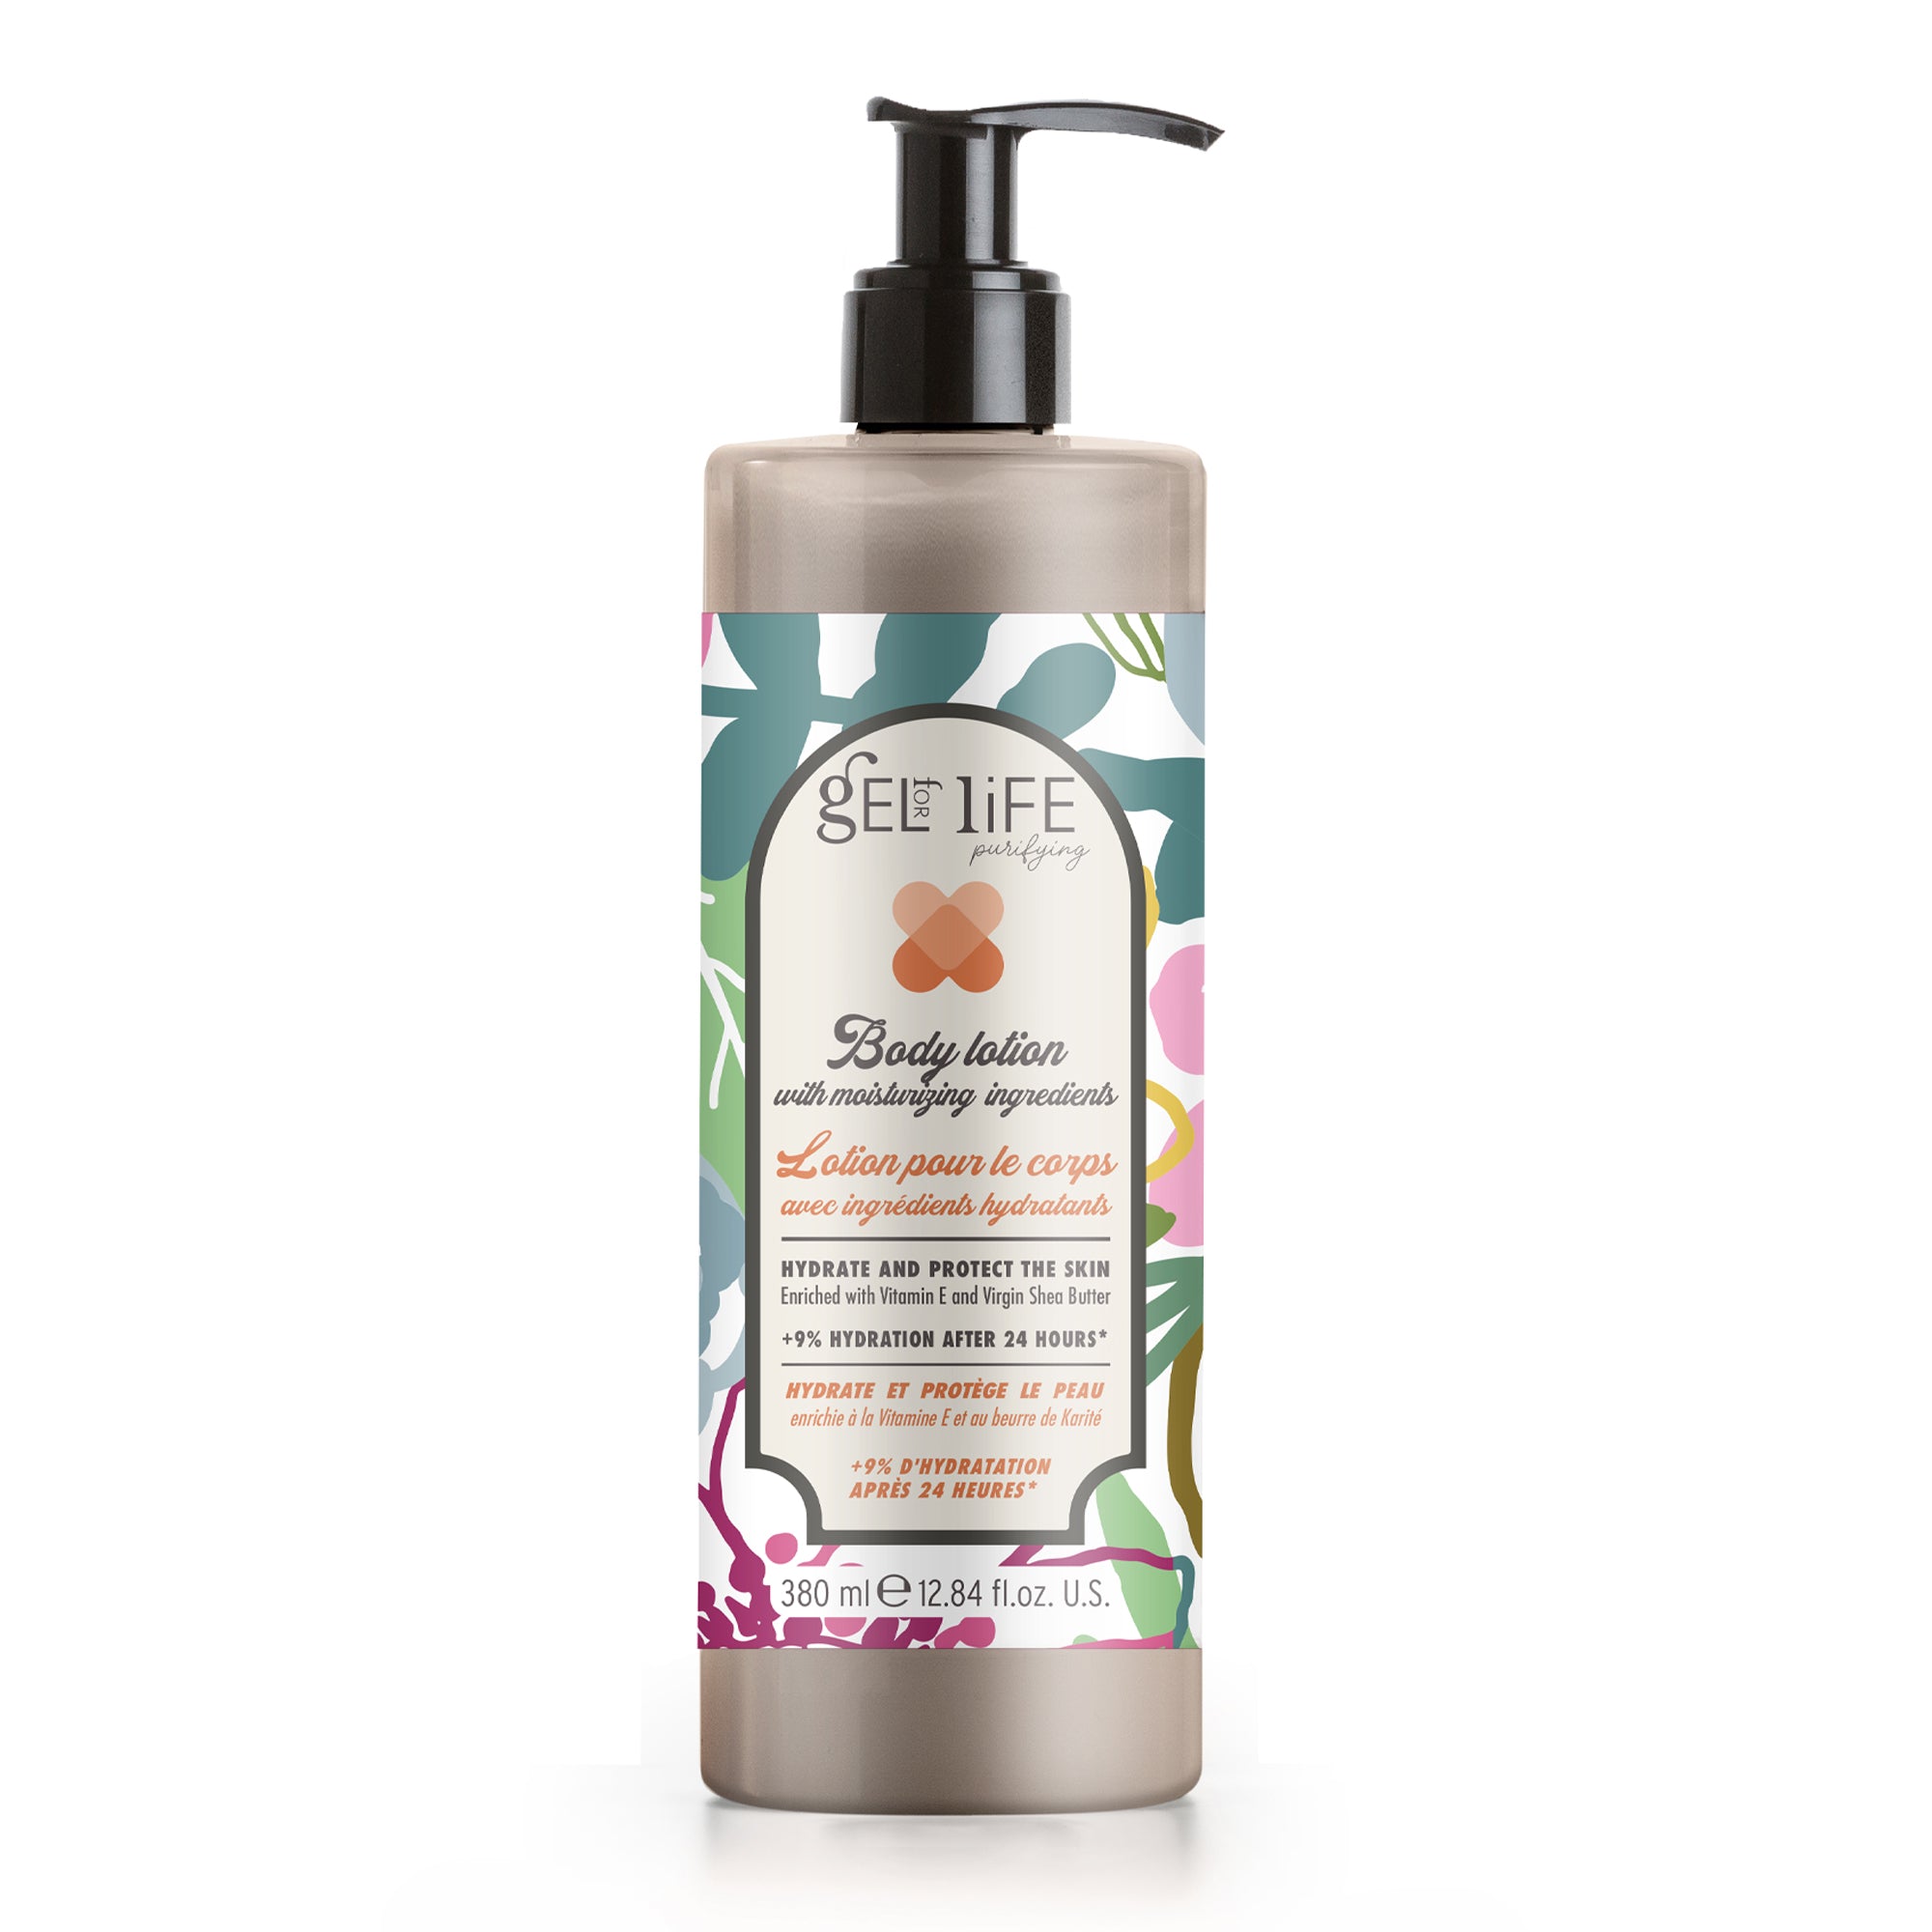 Gel for life purifying body lotion with moisturizing ingredients (12.84 fl.oz.)